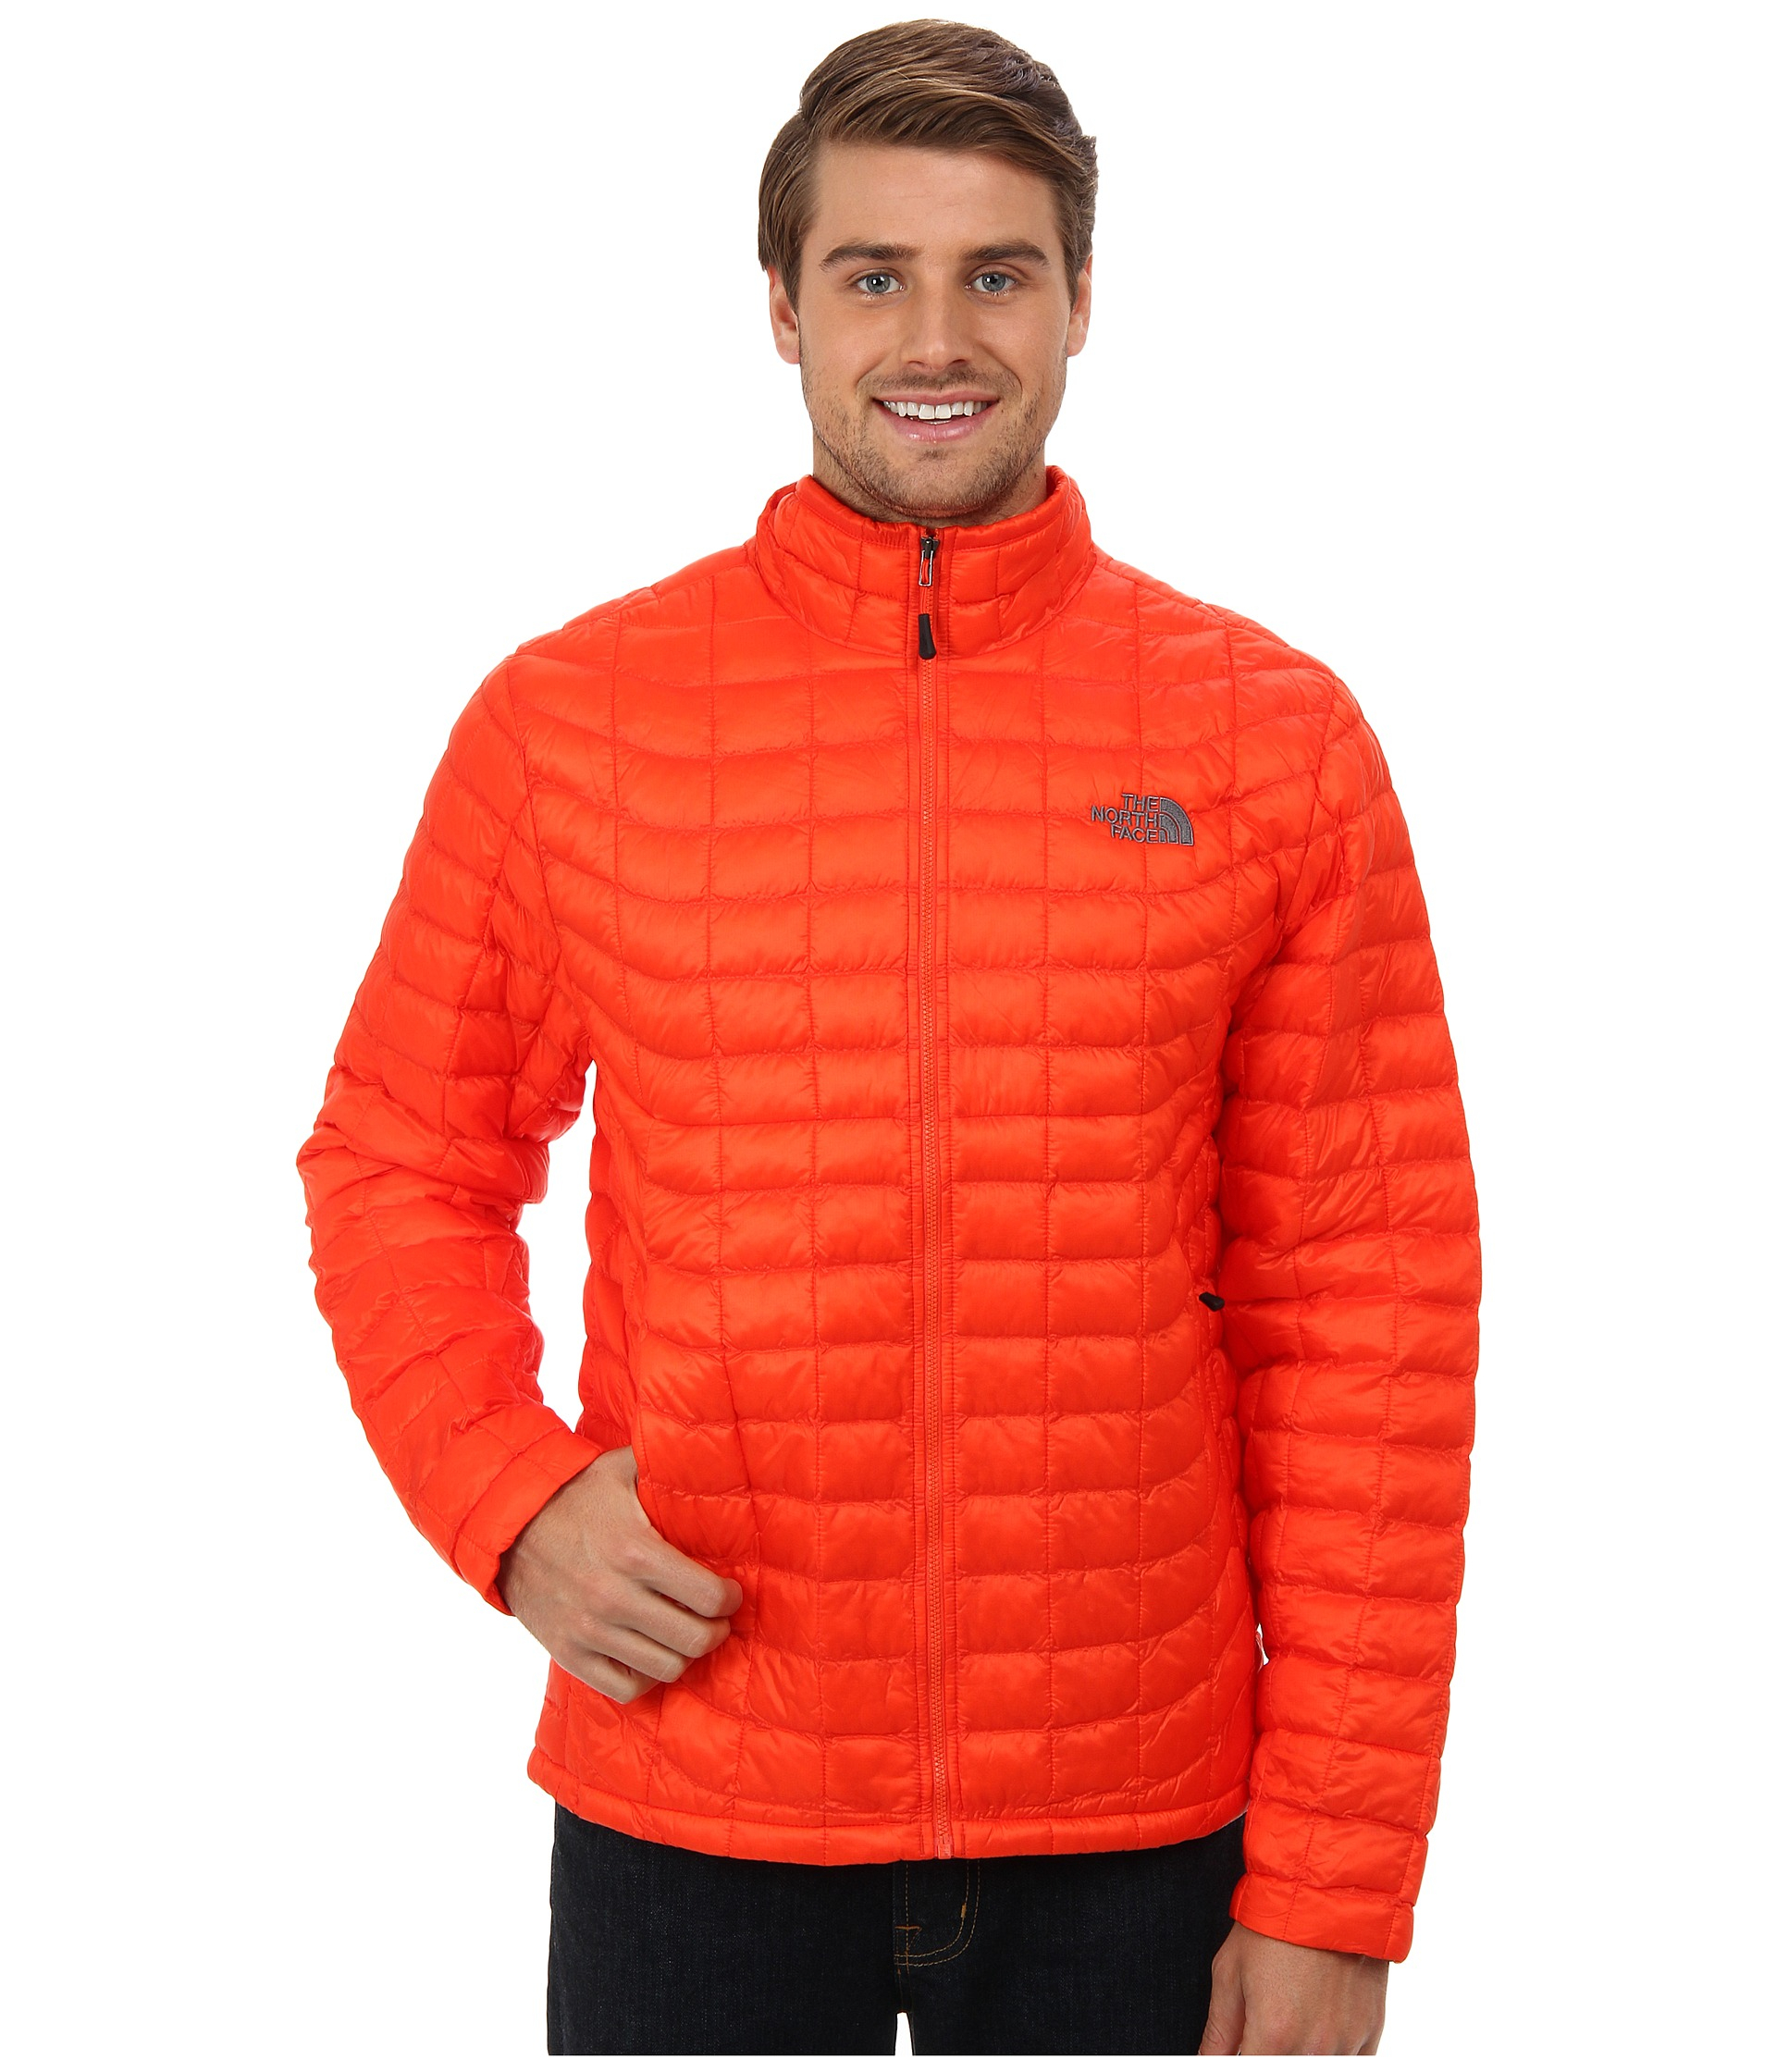 The North Face Thermoball™ Full Zip Jacket in Orange for Men - Lyst